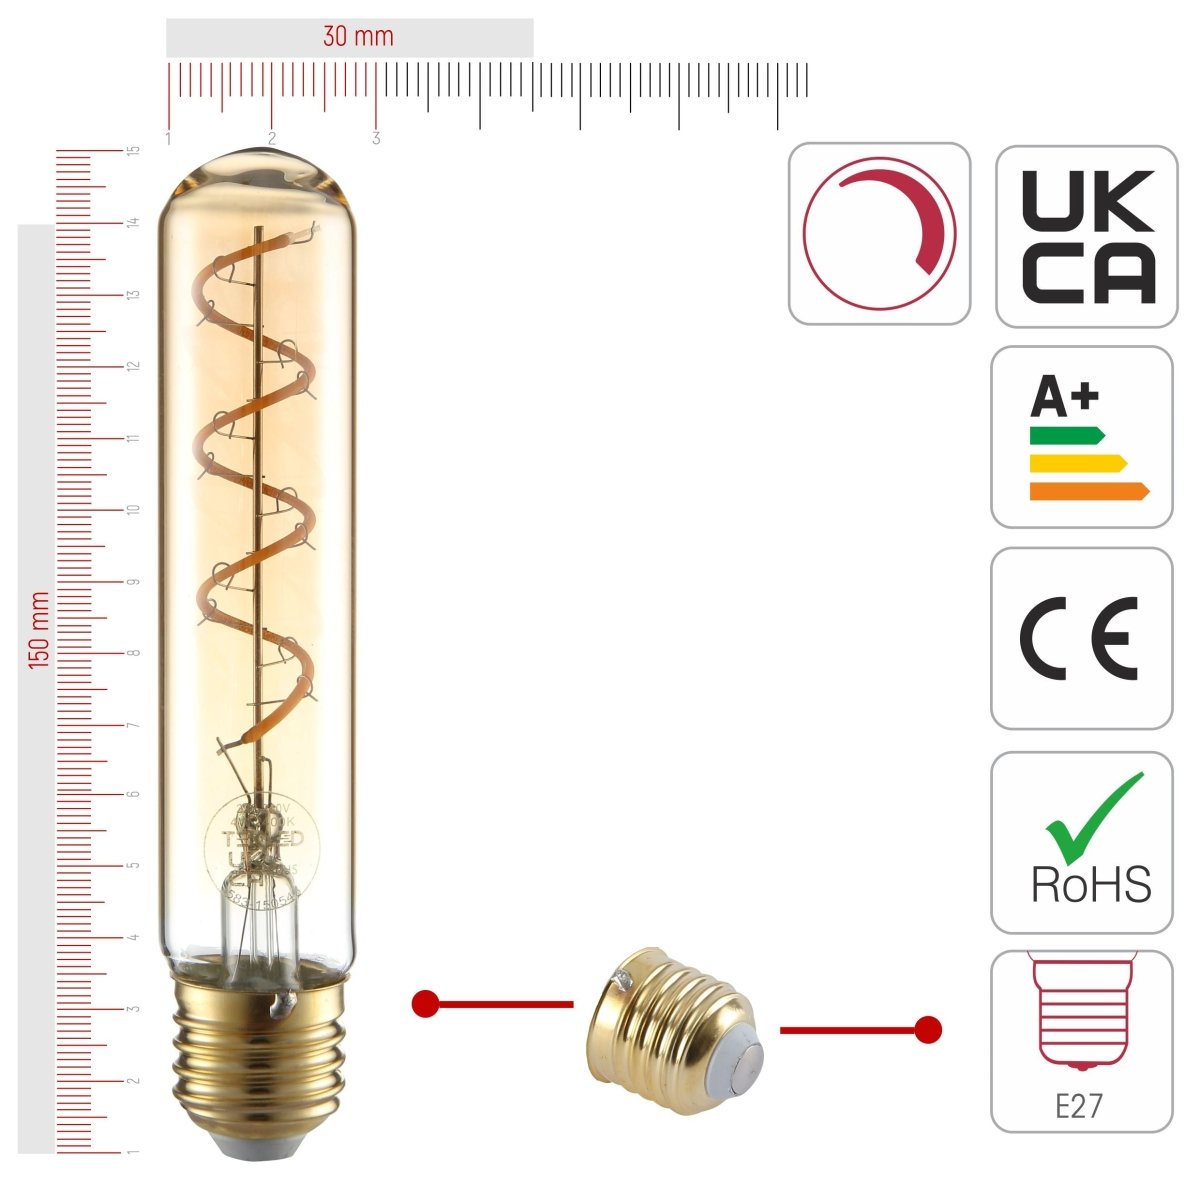 Size and certifications of LED Dimmable Filament Bulb T30 Tubular E27 Edison Screw 4W 240lm 150mm Warm White 2400K Amber Pack of 4 | TEKLED 583-150545